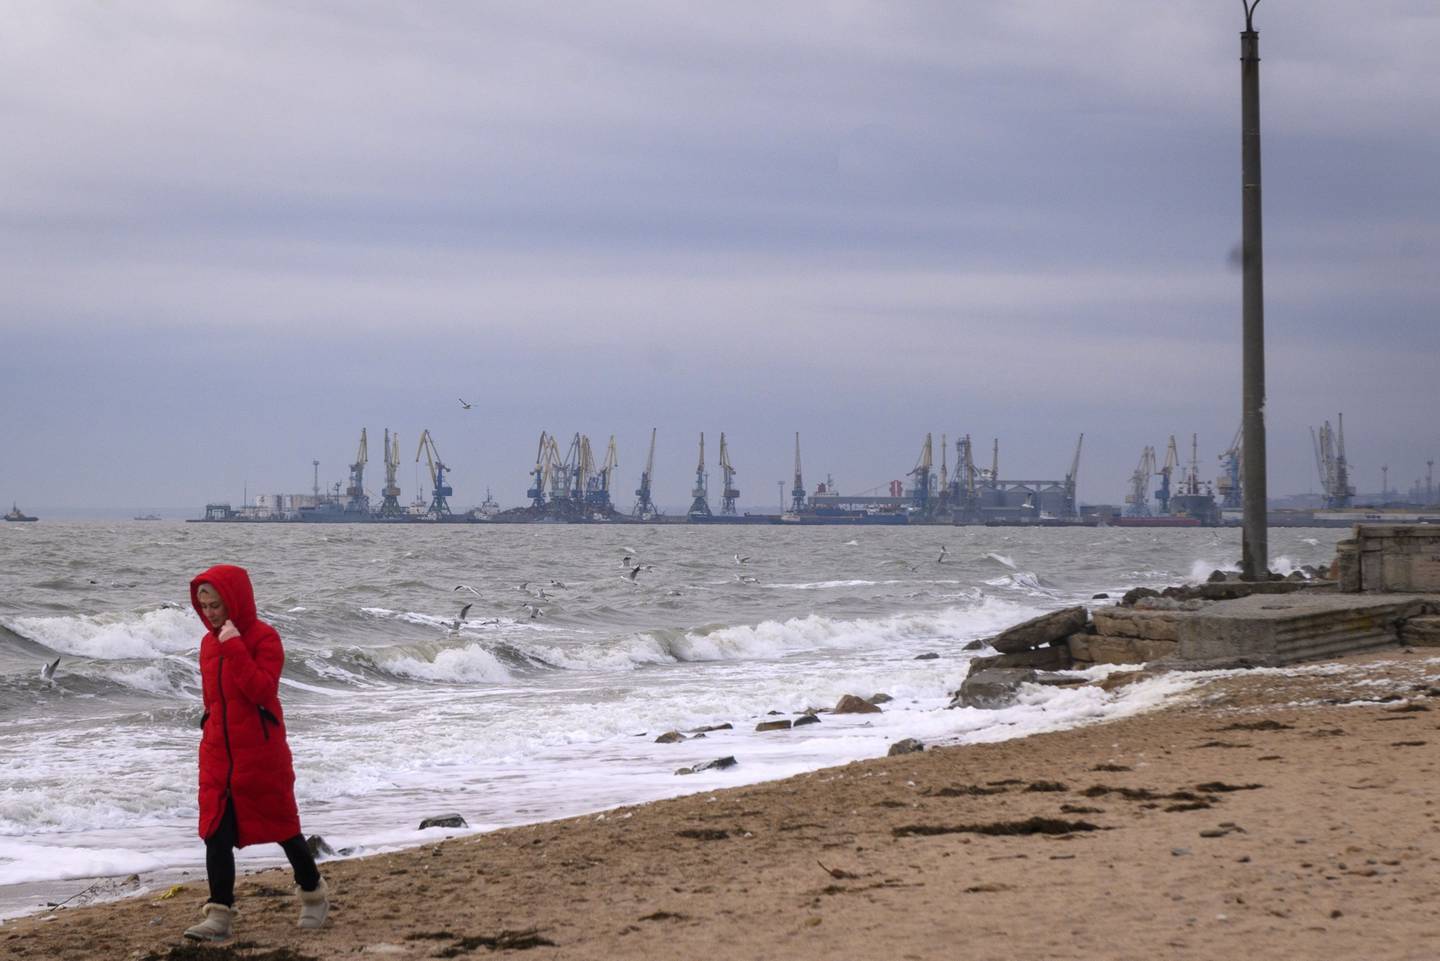 The Berdyansk Commercial Sea Port on Jan. 17, about 100 kilometers from the front line.dfd